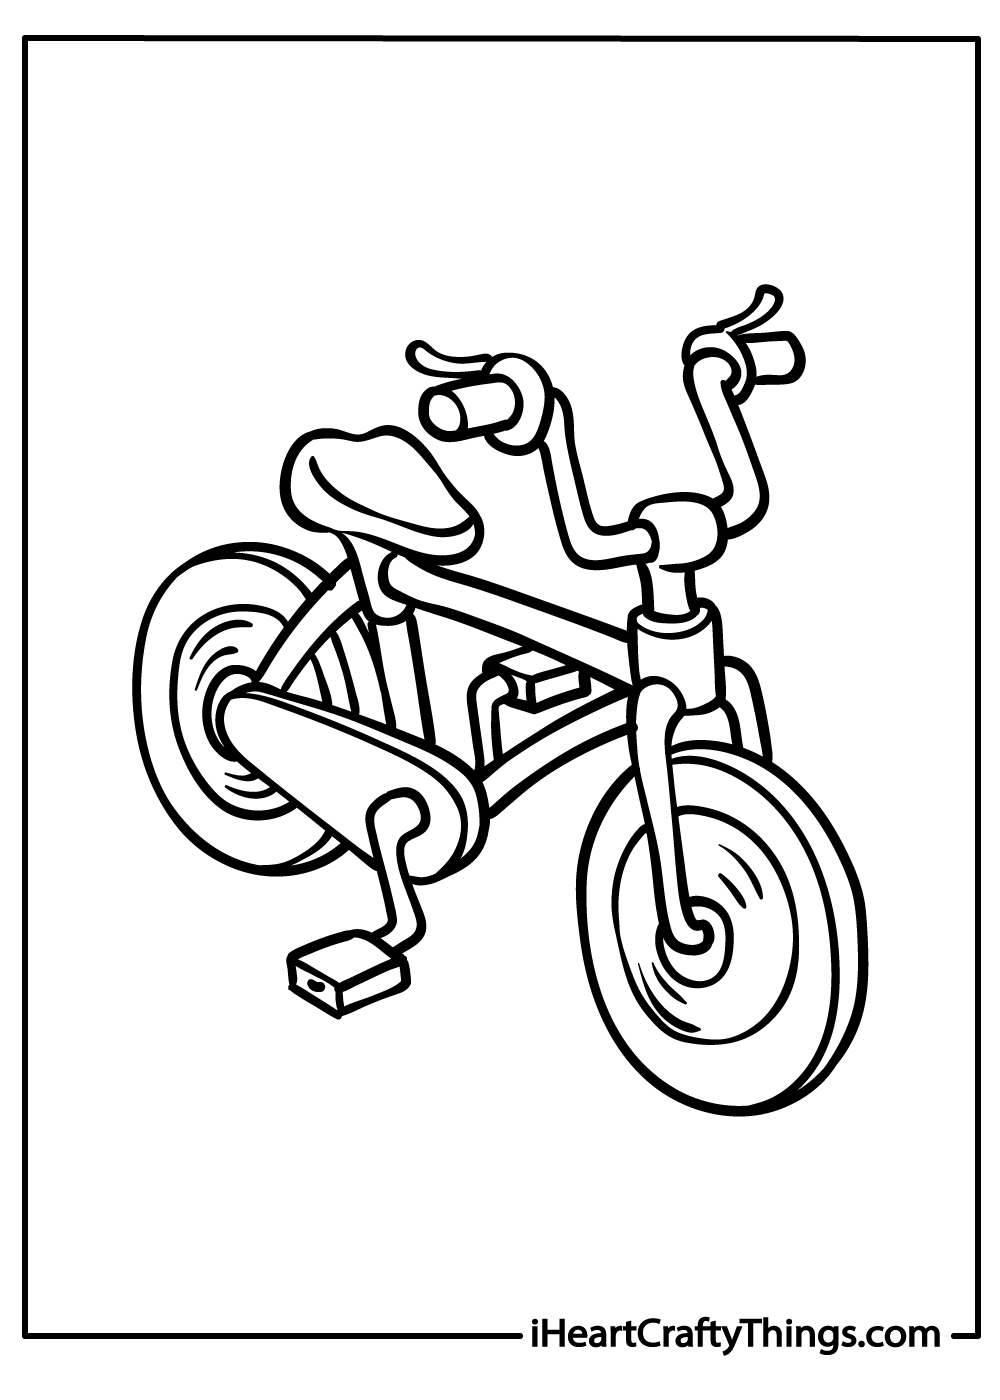 bicycle coloring pages free download